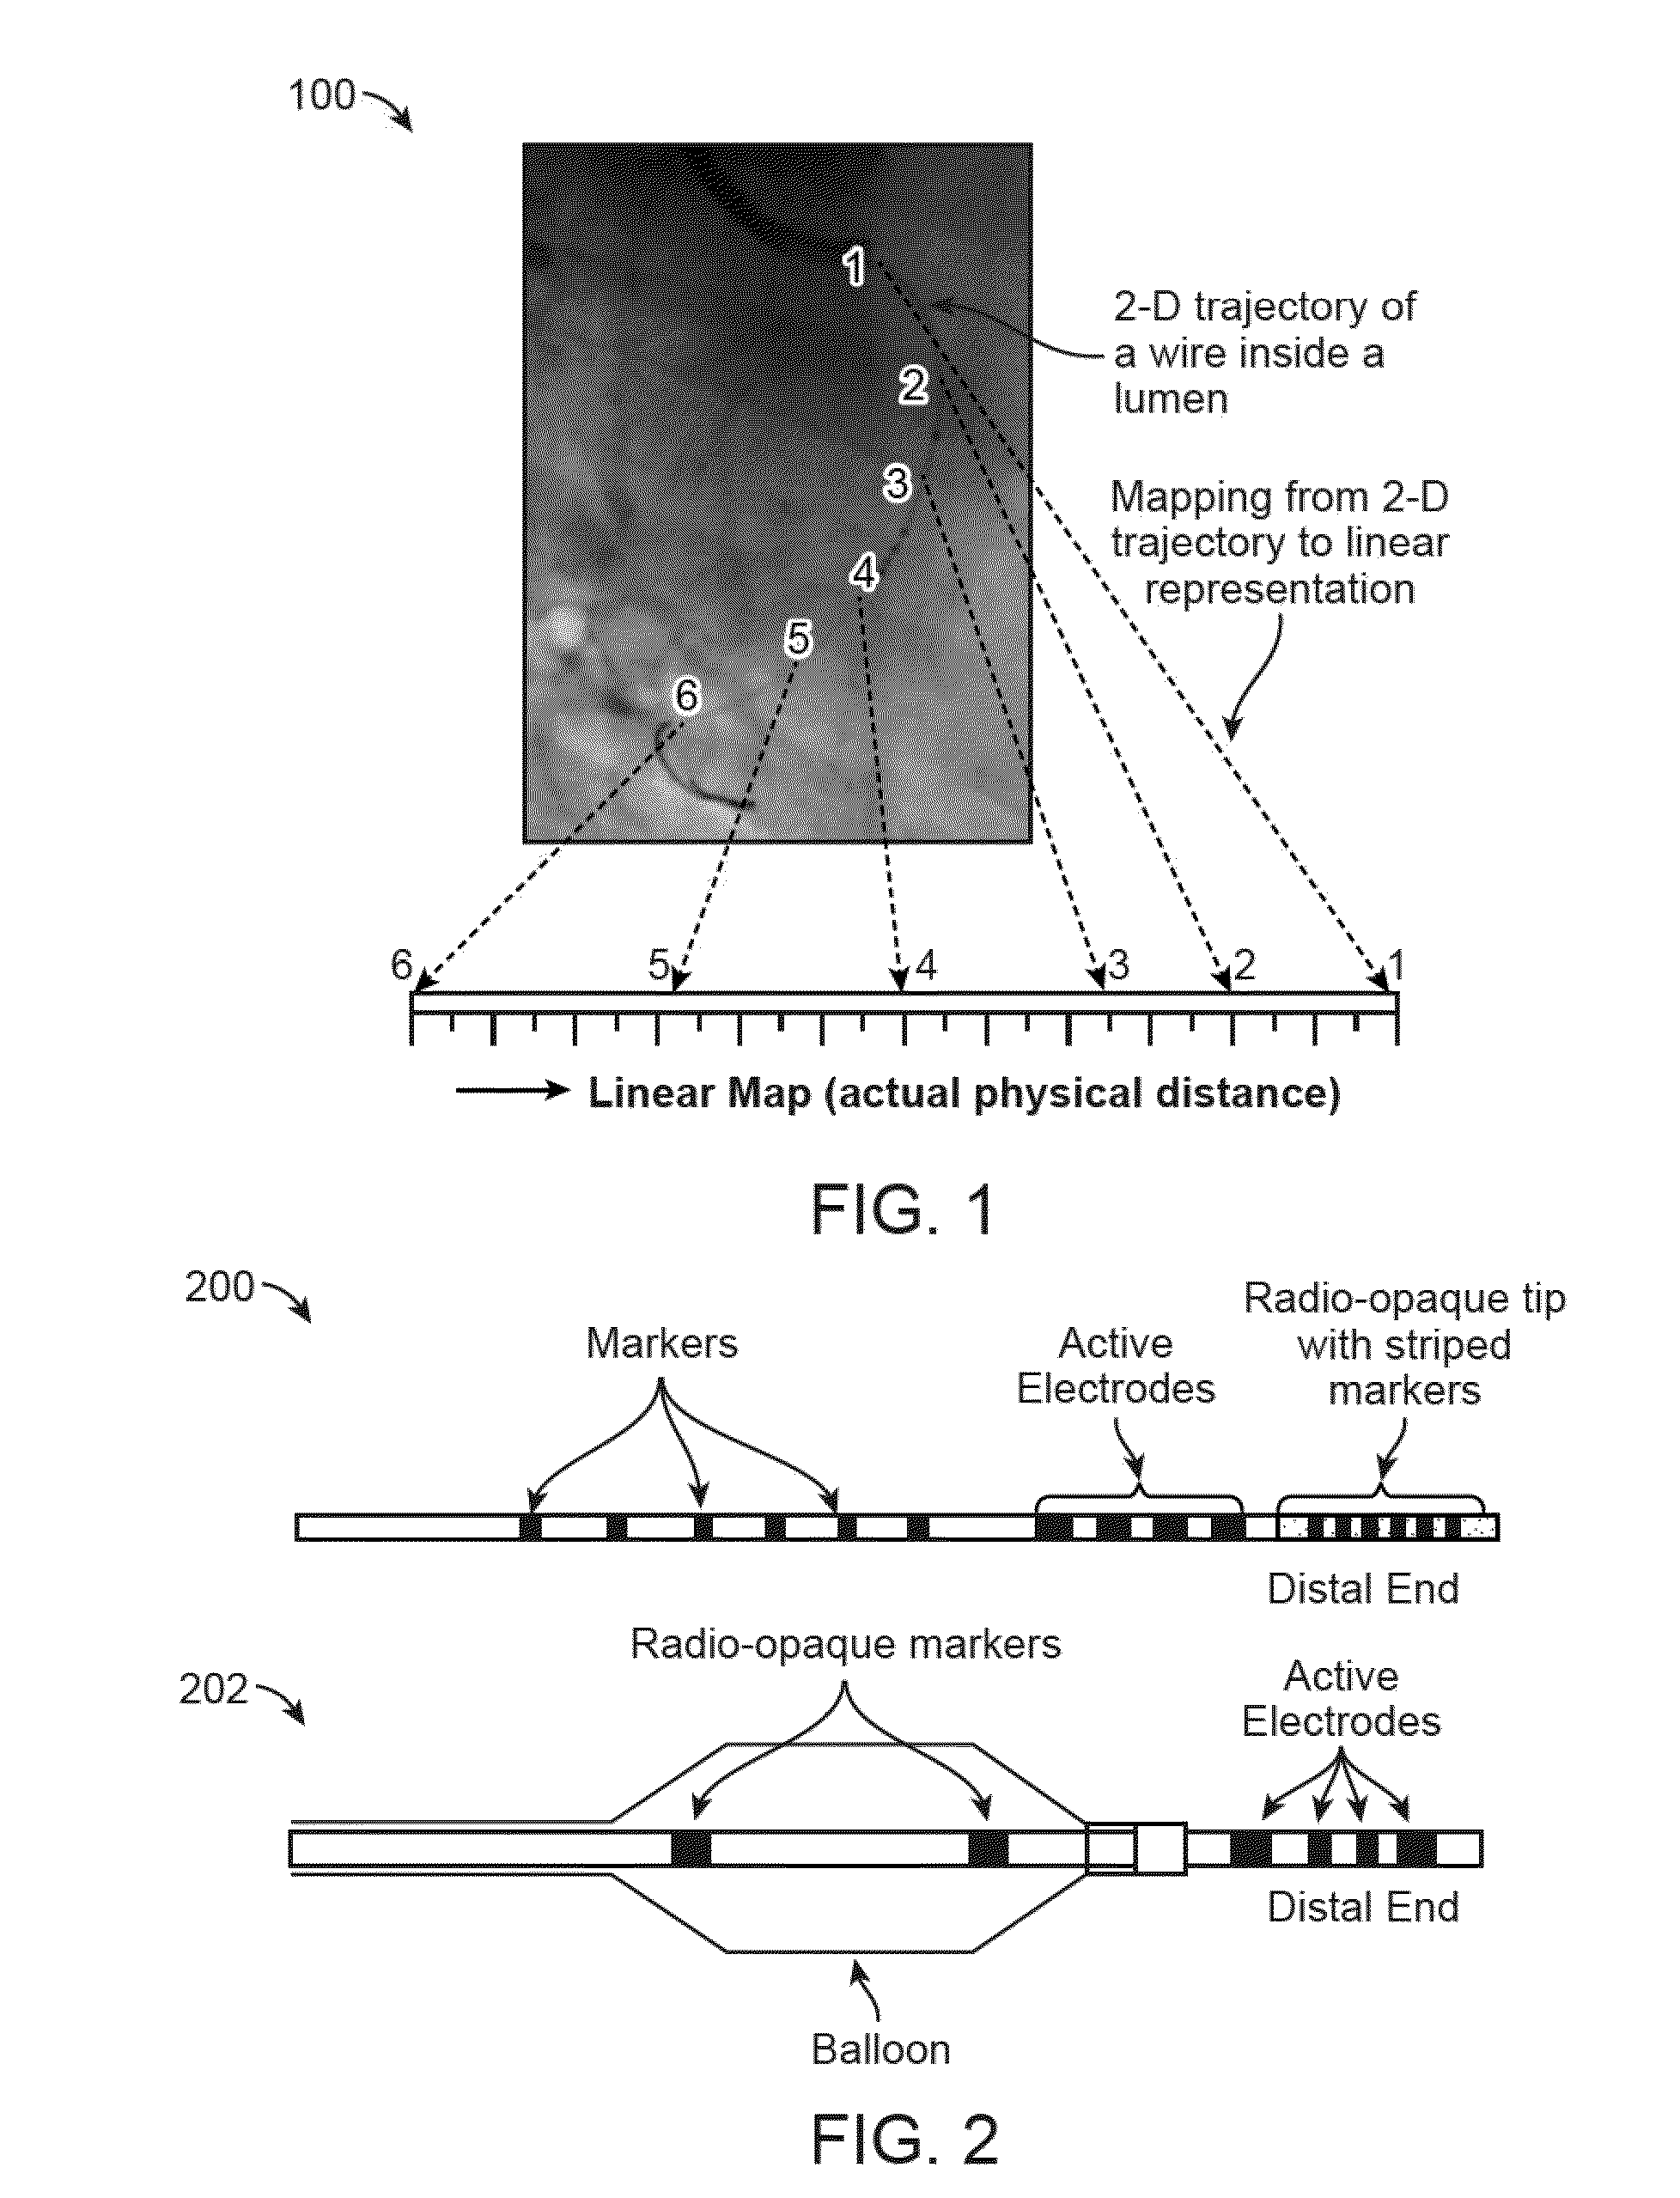 Systems for detecting and tracking of objects and co-registration